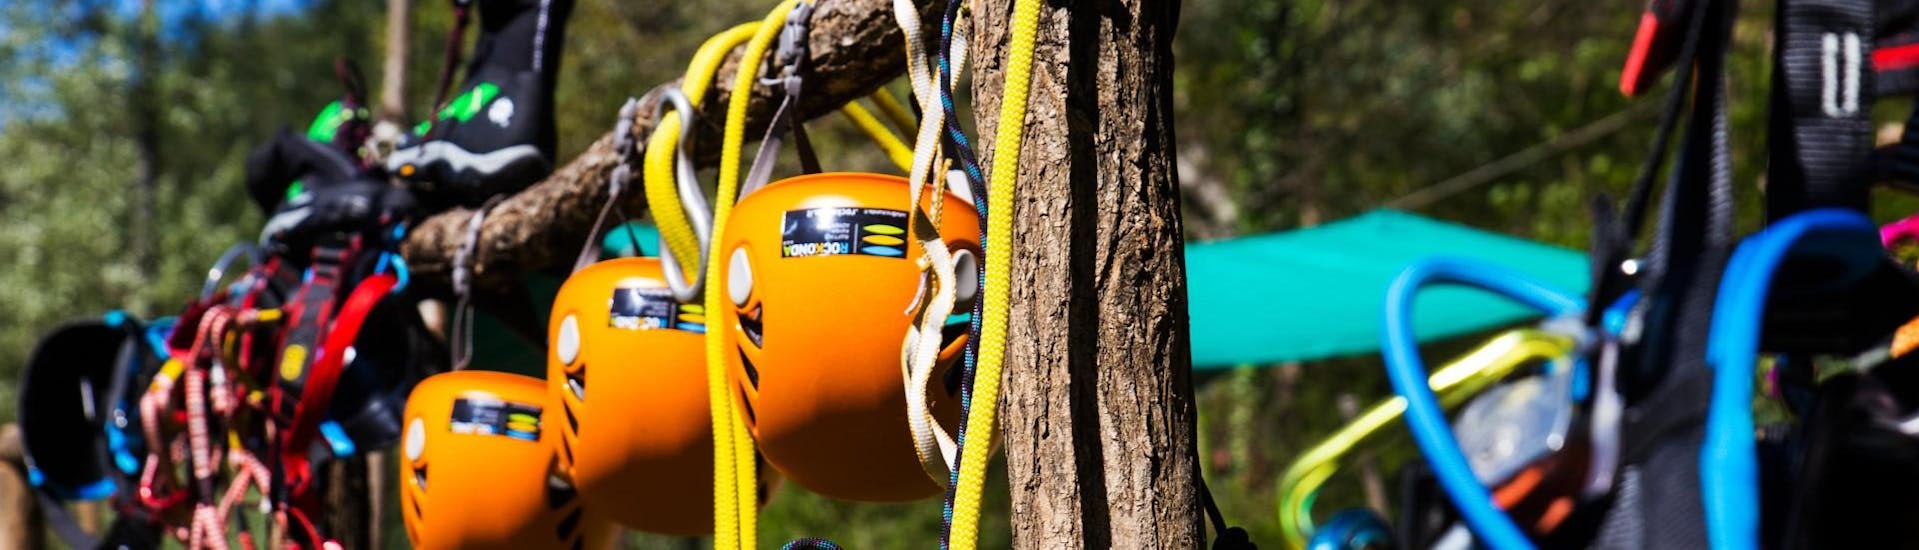 The equipment used during Canyoning in Rio Inferno organized by Rockonda is hung in the sun to dry.